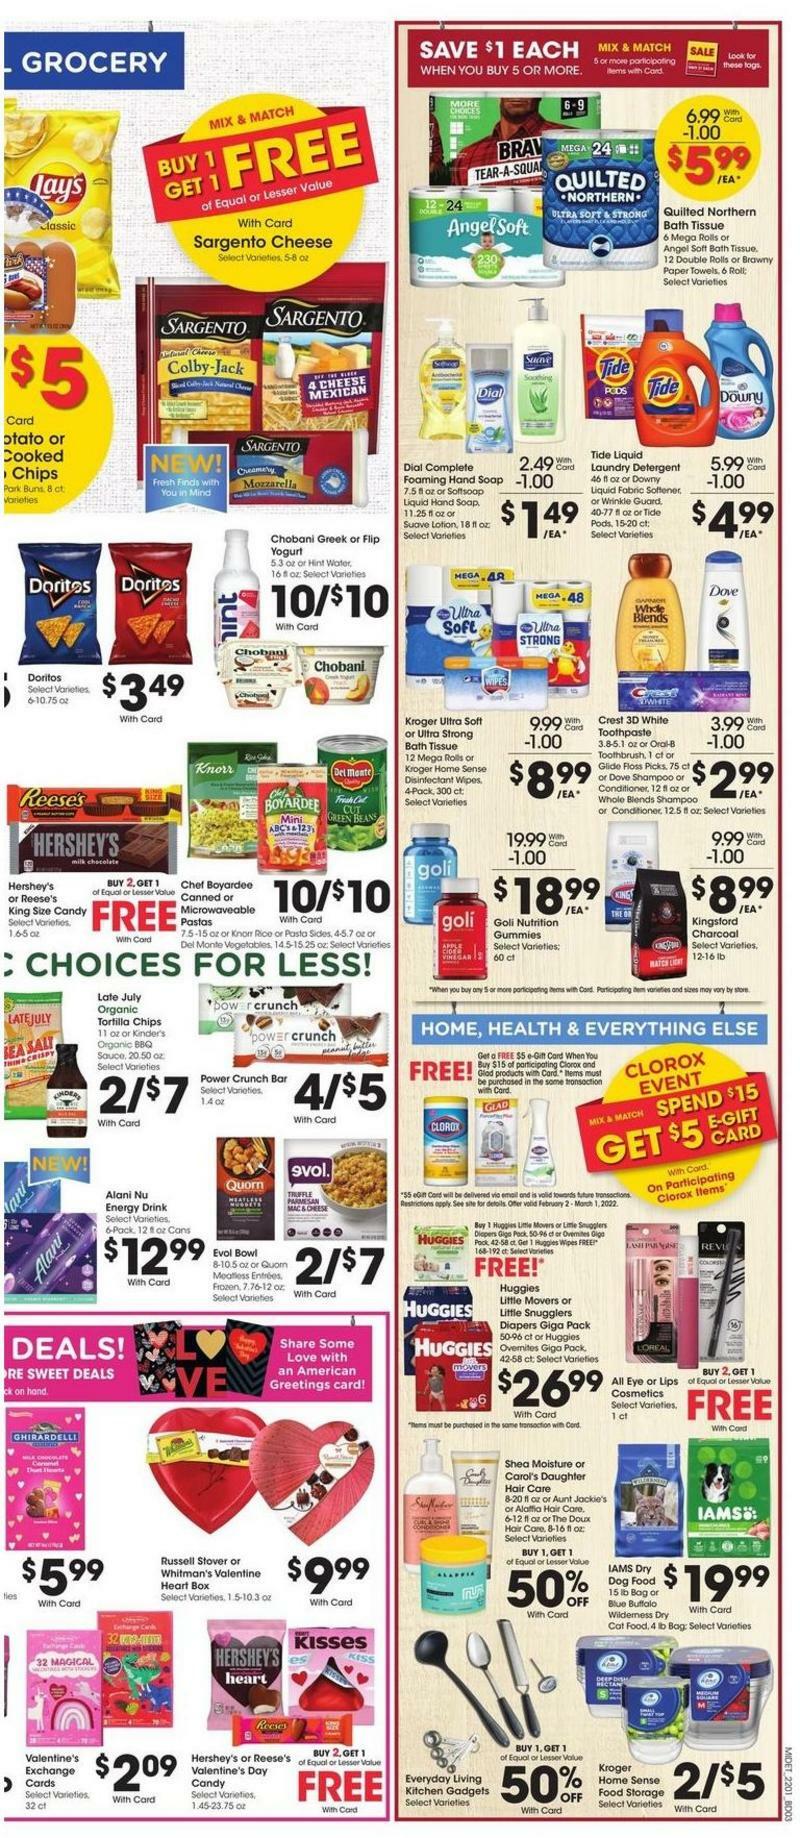 Kroger Weekly Ad from February 2